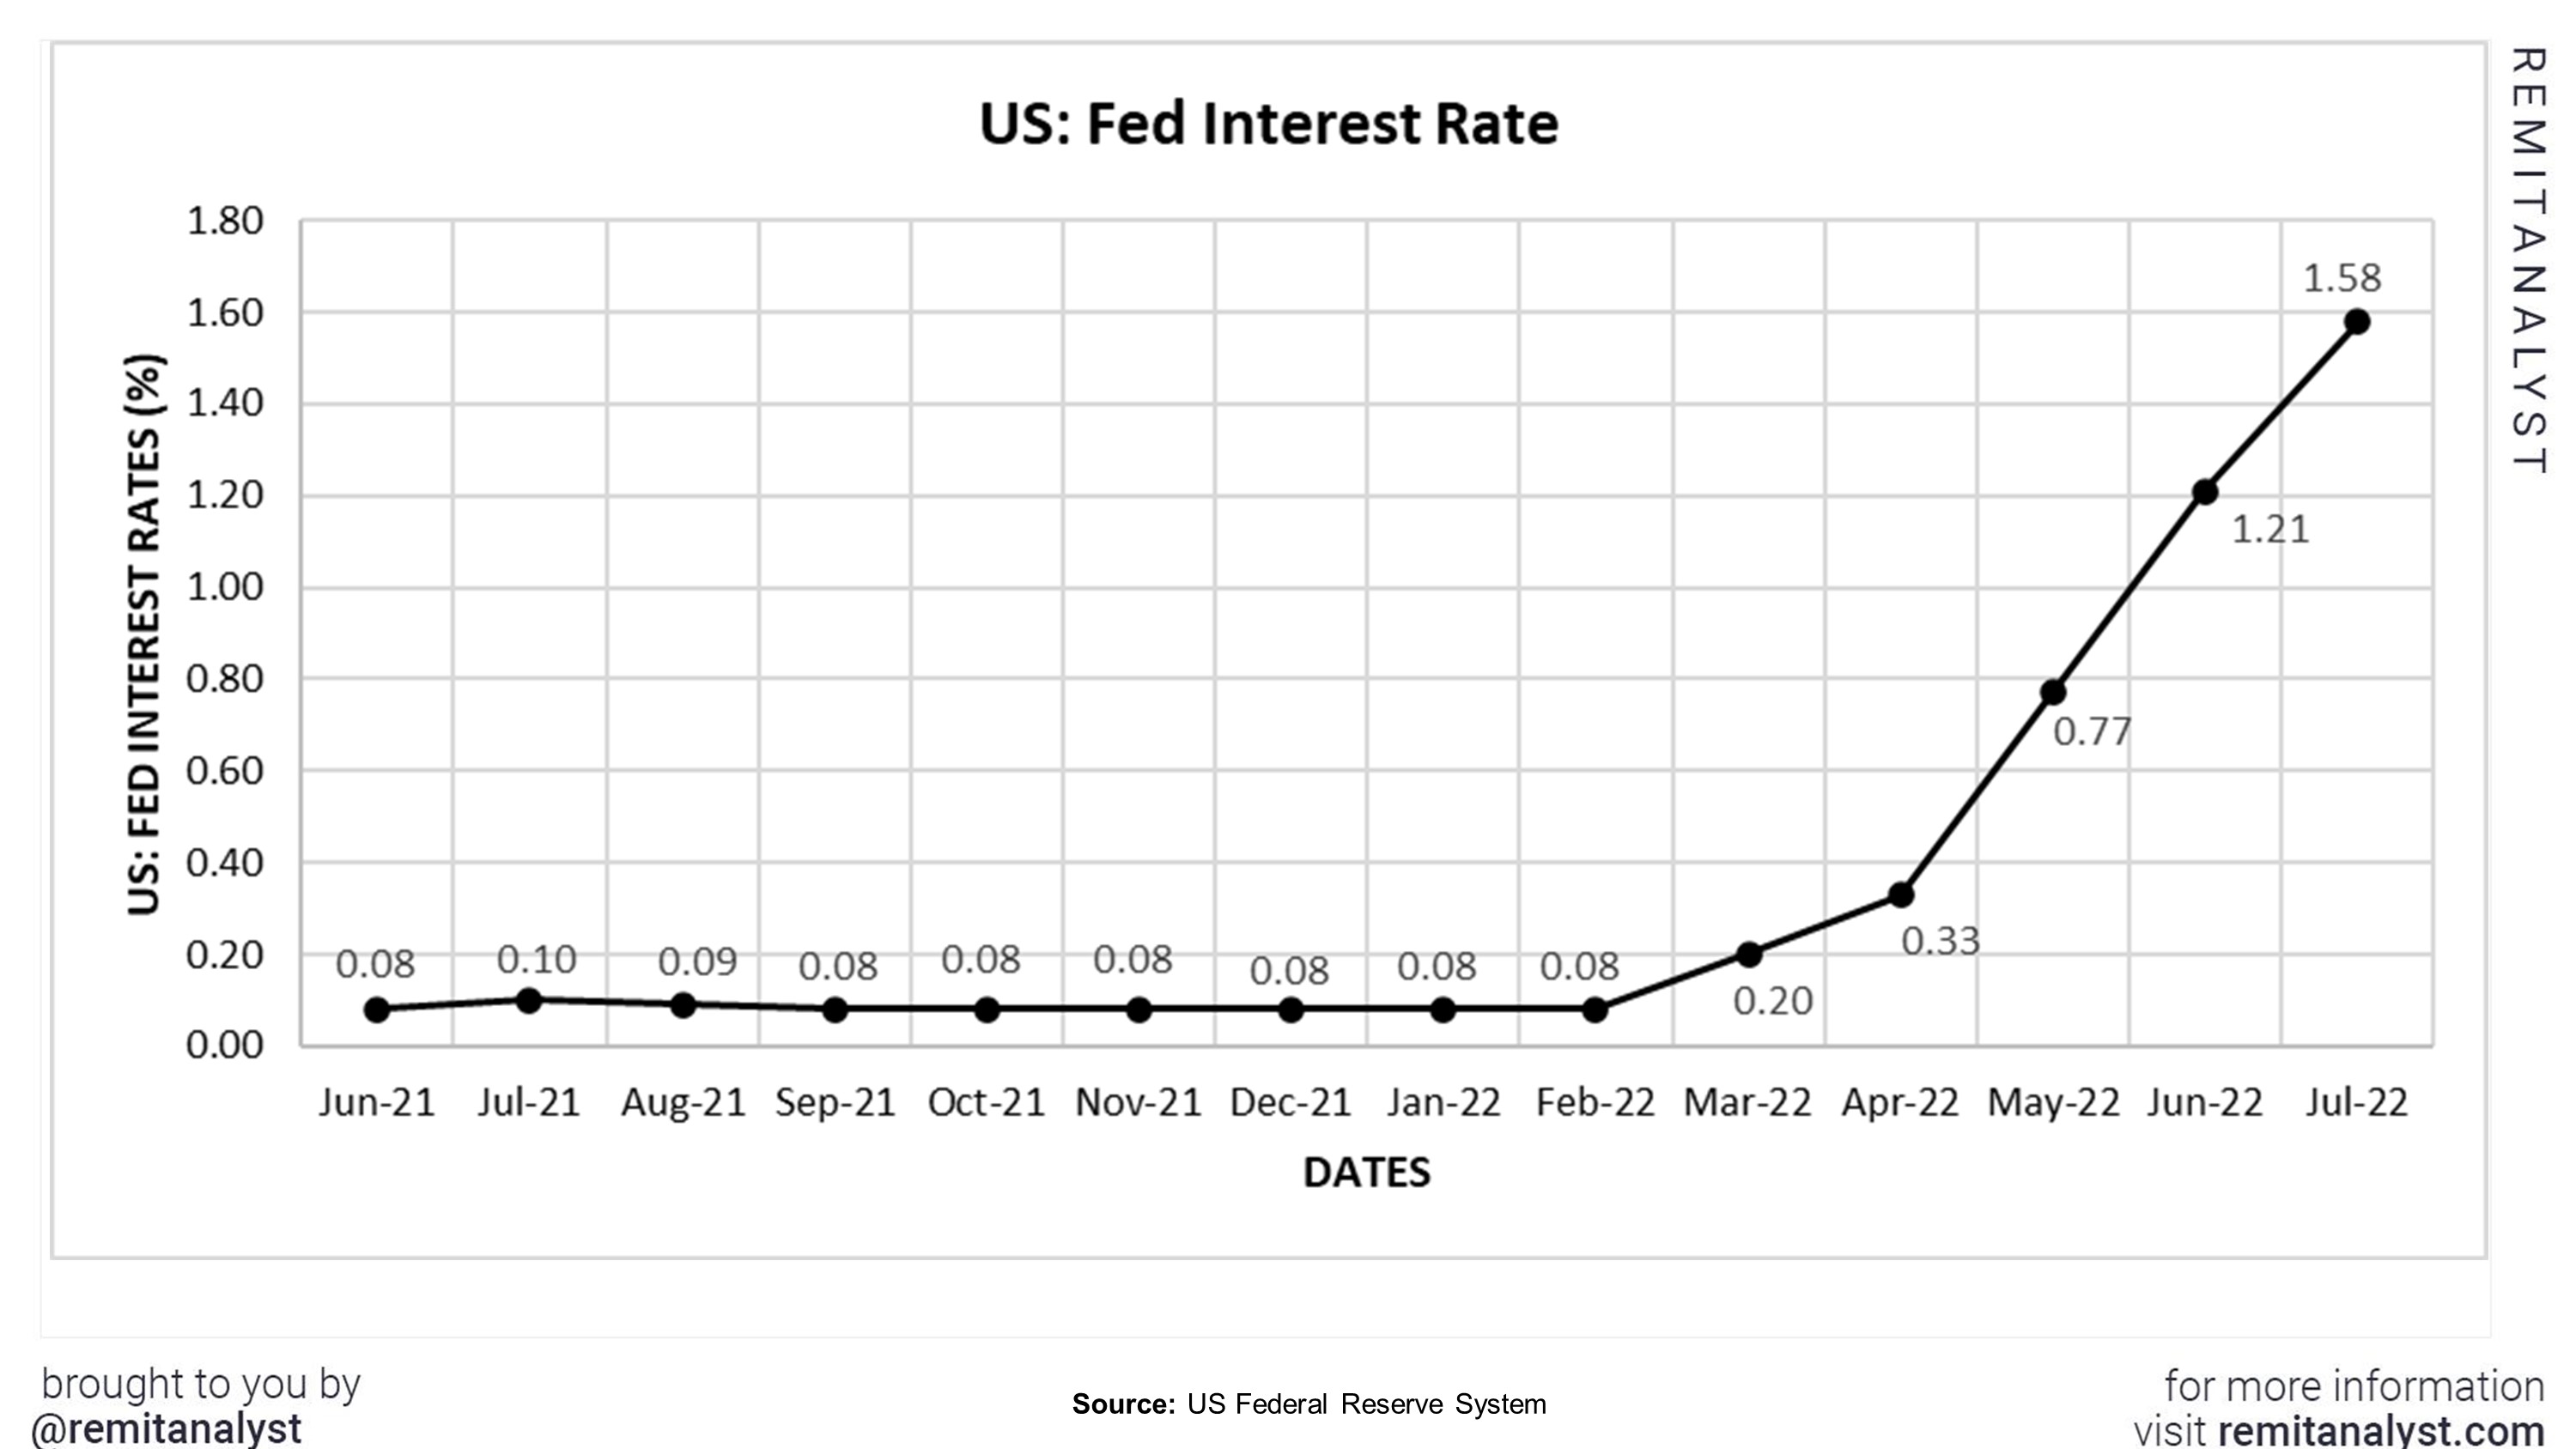 Interest_Rates_in_US_from_Apr-2021_to_Jul-2022.jpg